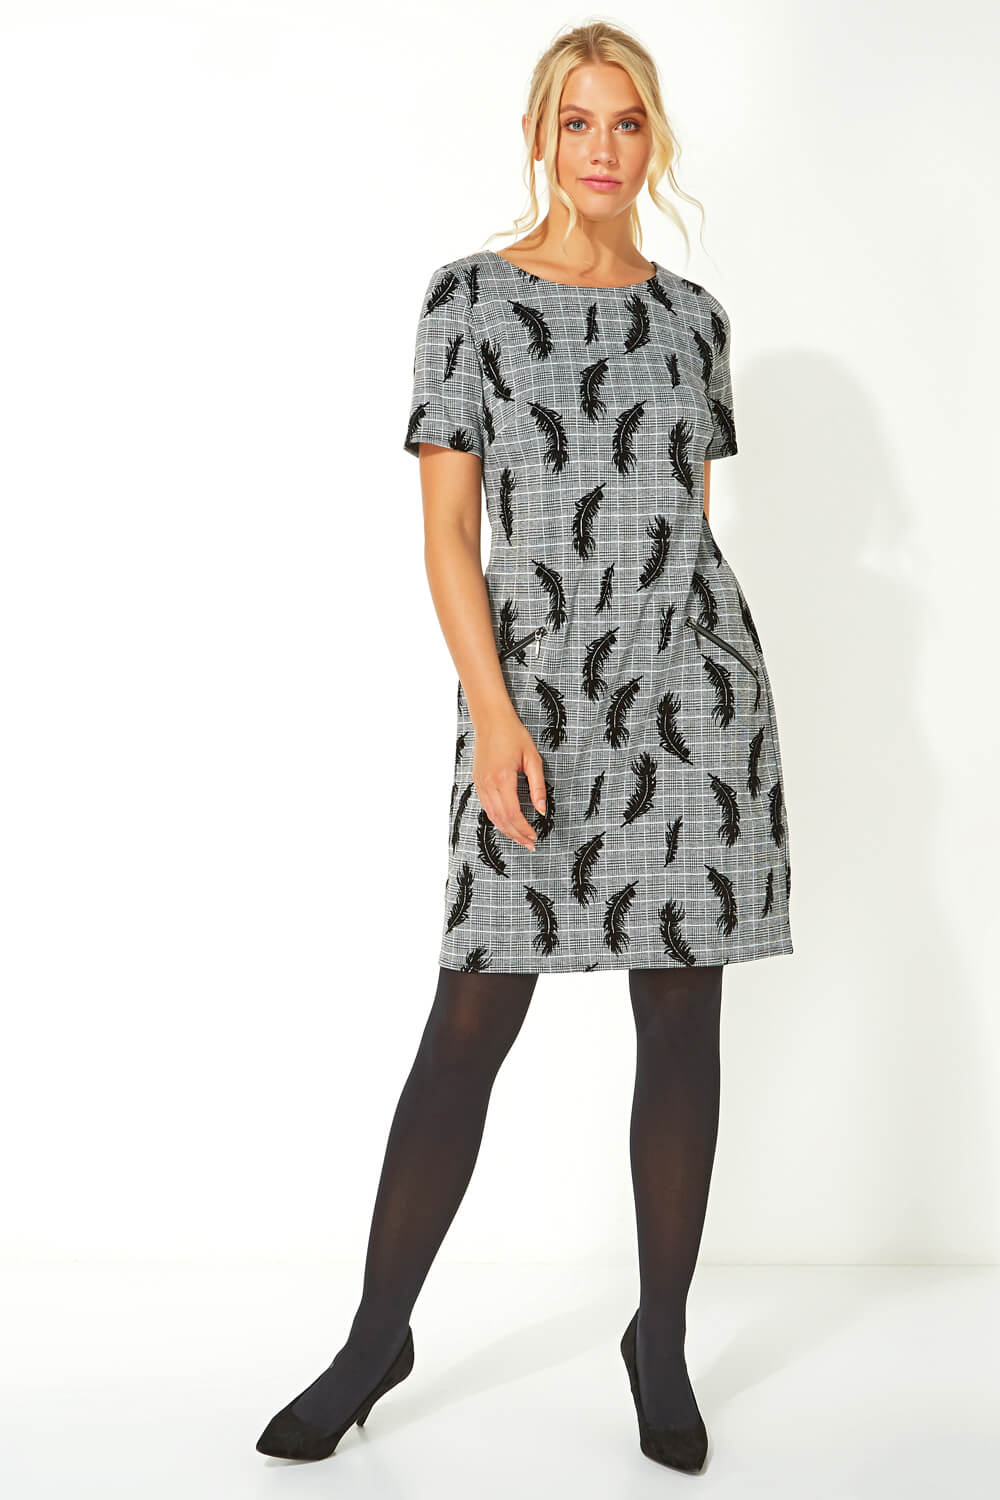 Grey Feather Checked Smart Shift Dress, Image 2 of 5